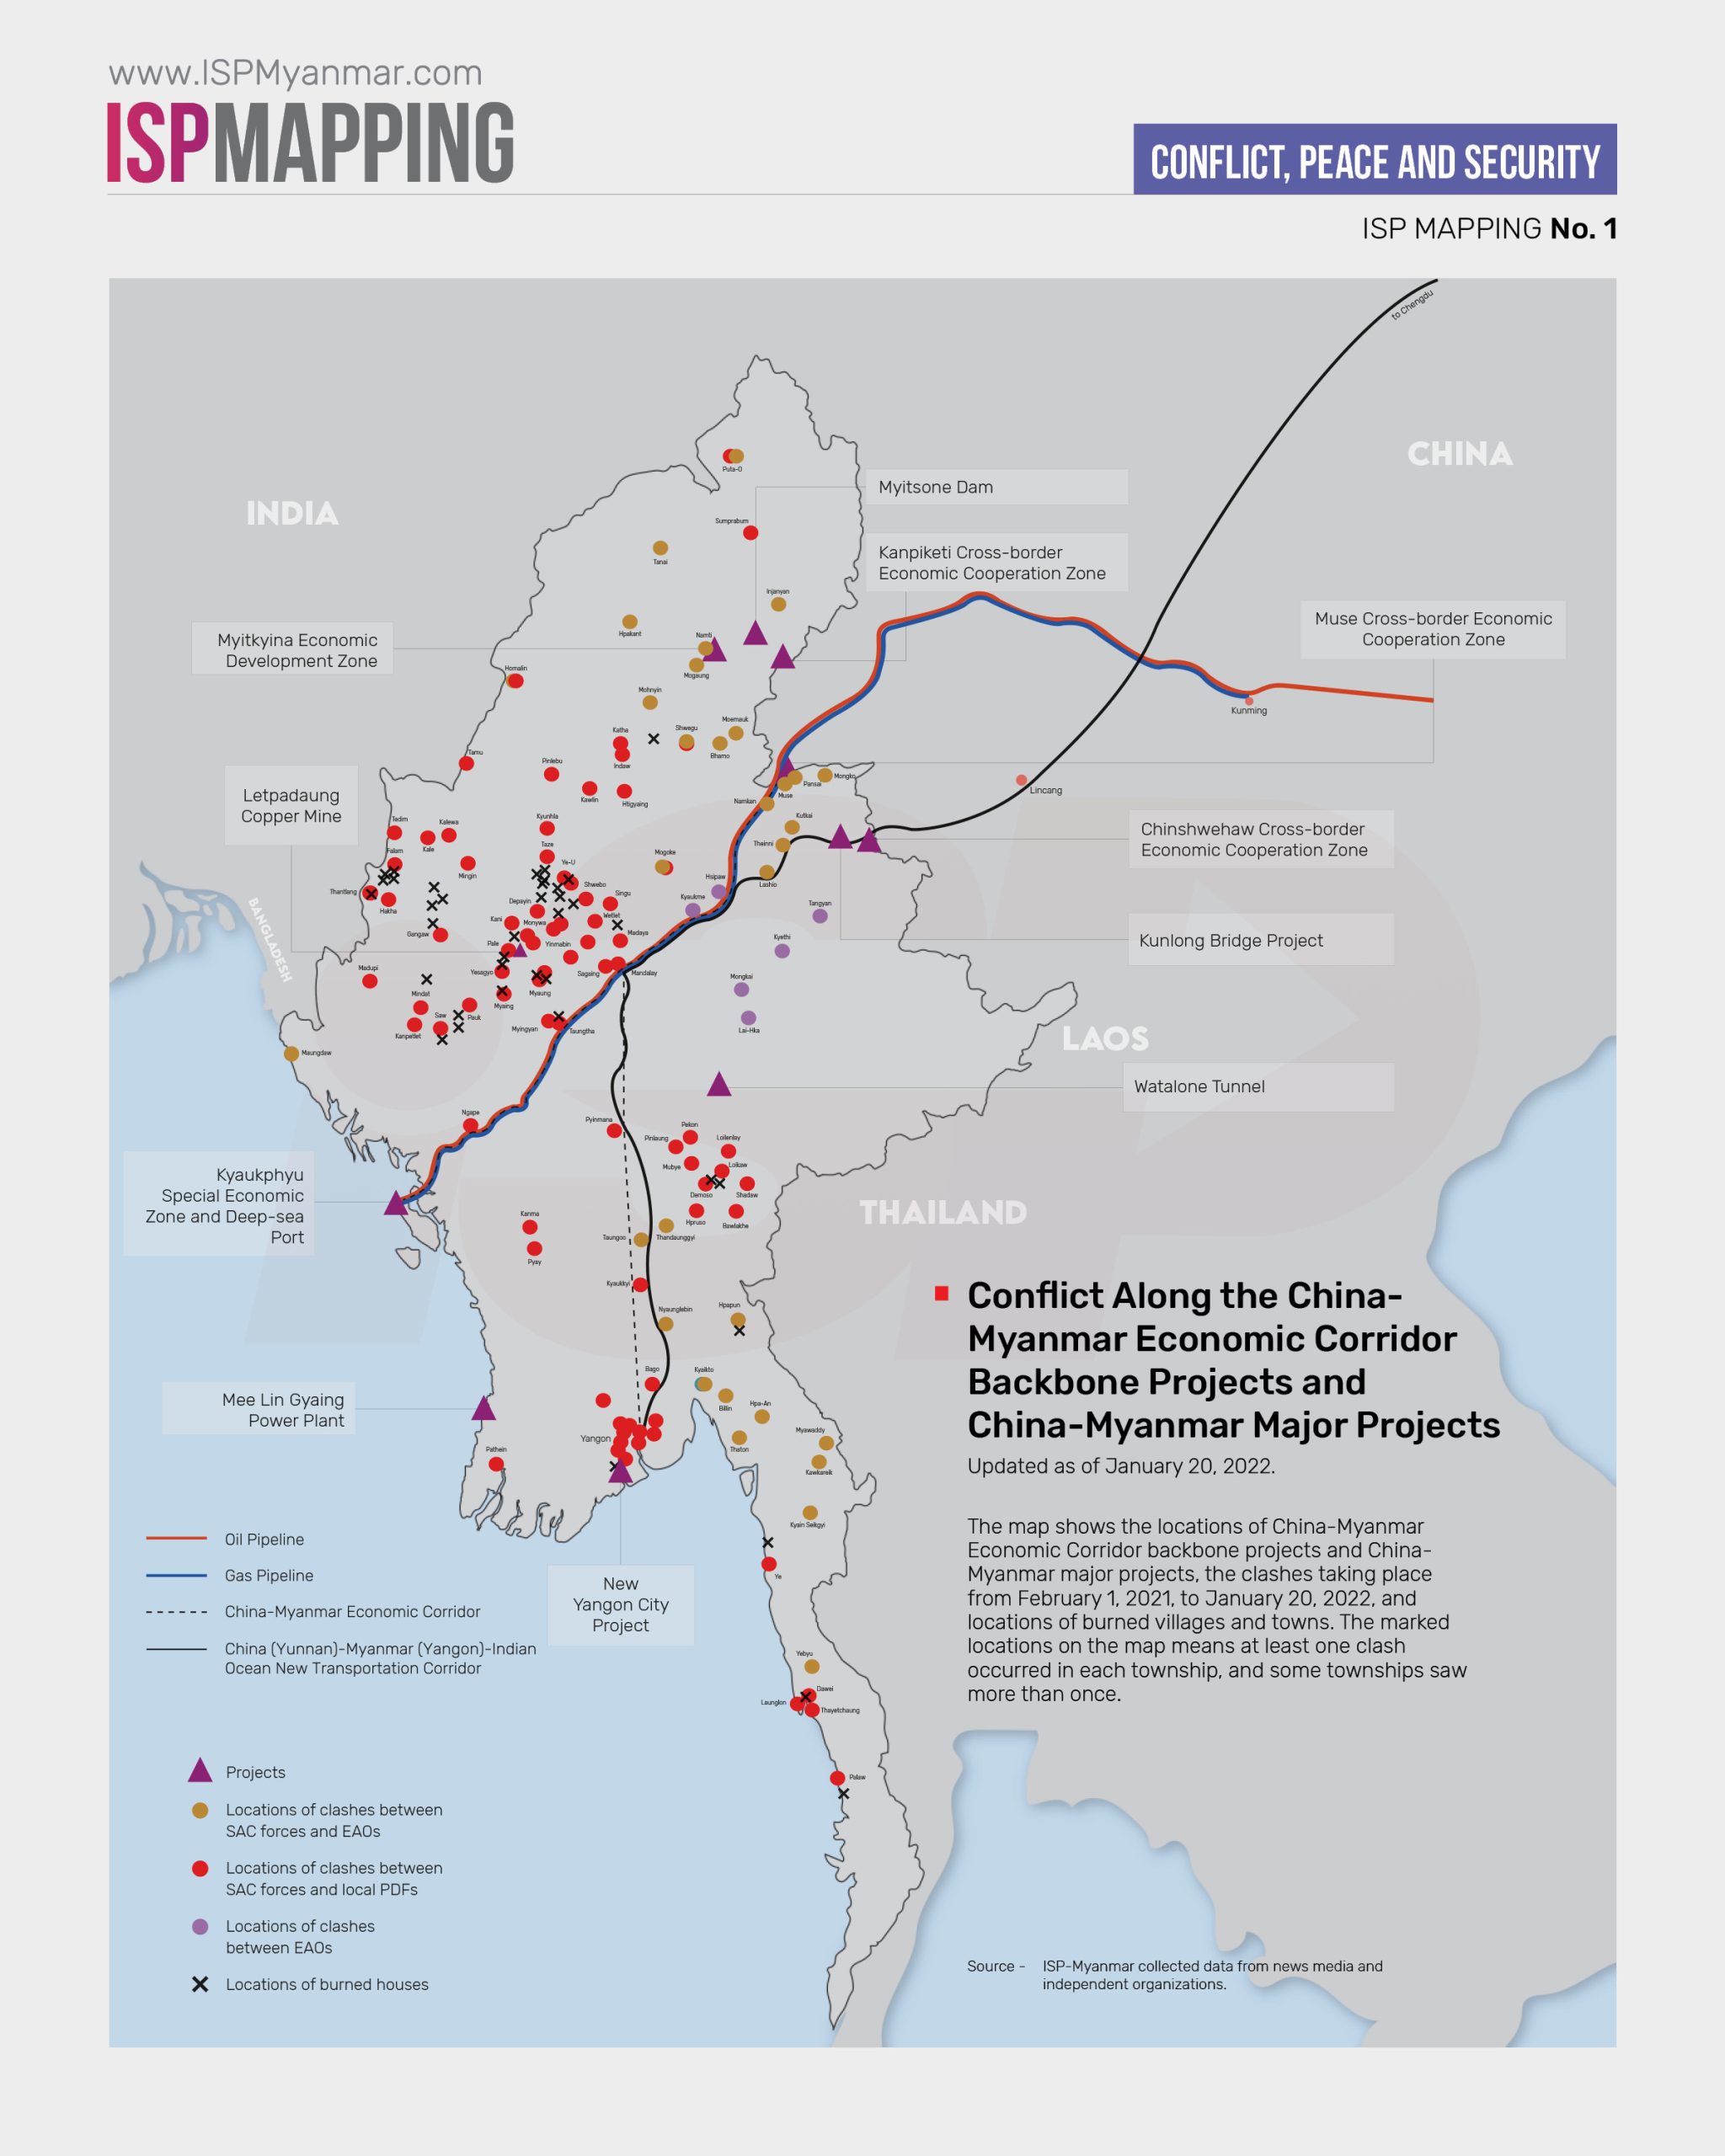 Conflict Along the China-Myanmar Economic Corridor Backbone Projects and China-Myanmar Major Projects